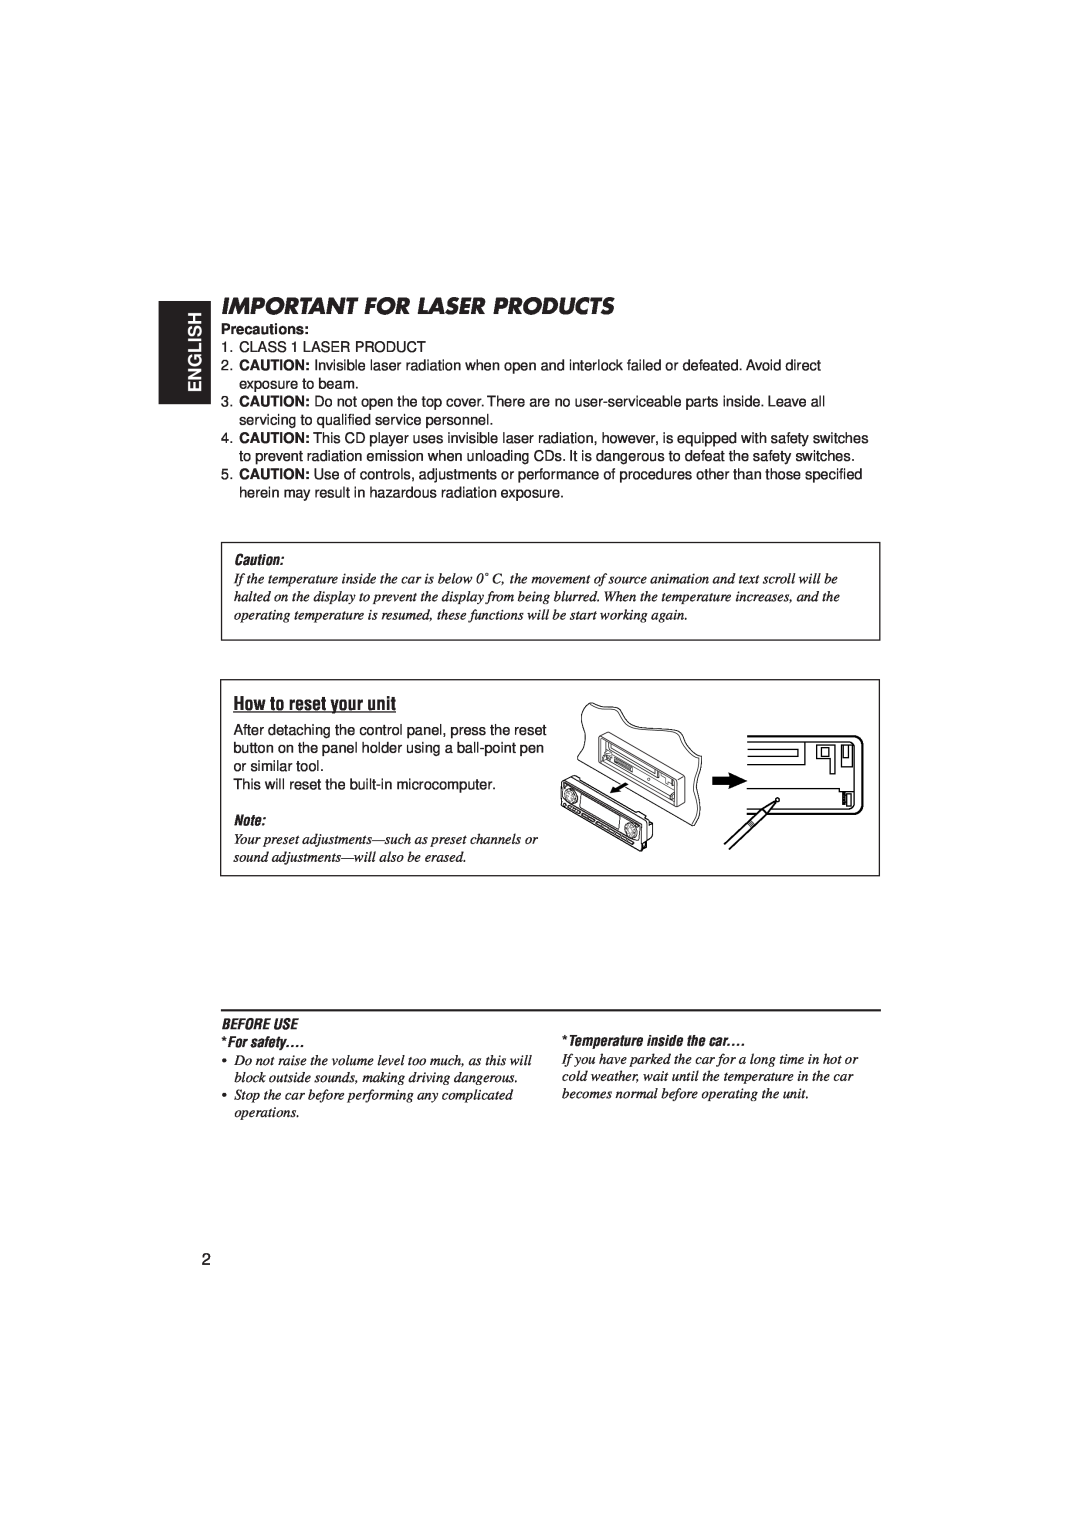 JVC IKD-LH2000 manual Important For Laser Products, English, How to reset your unit, Precautions, BEFORE USE For safety 